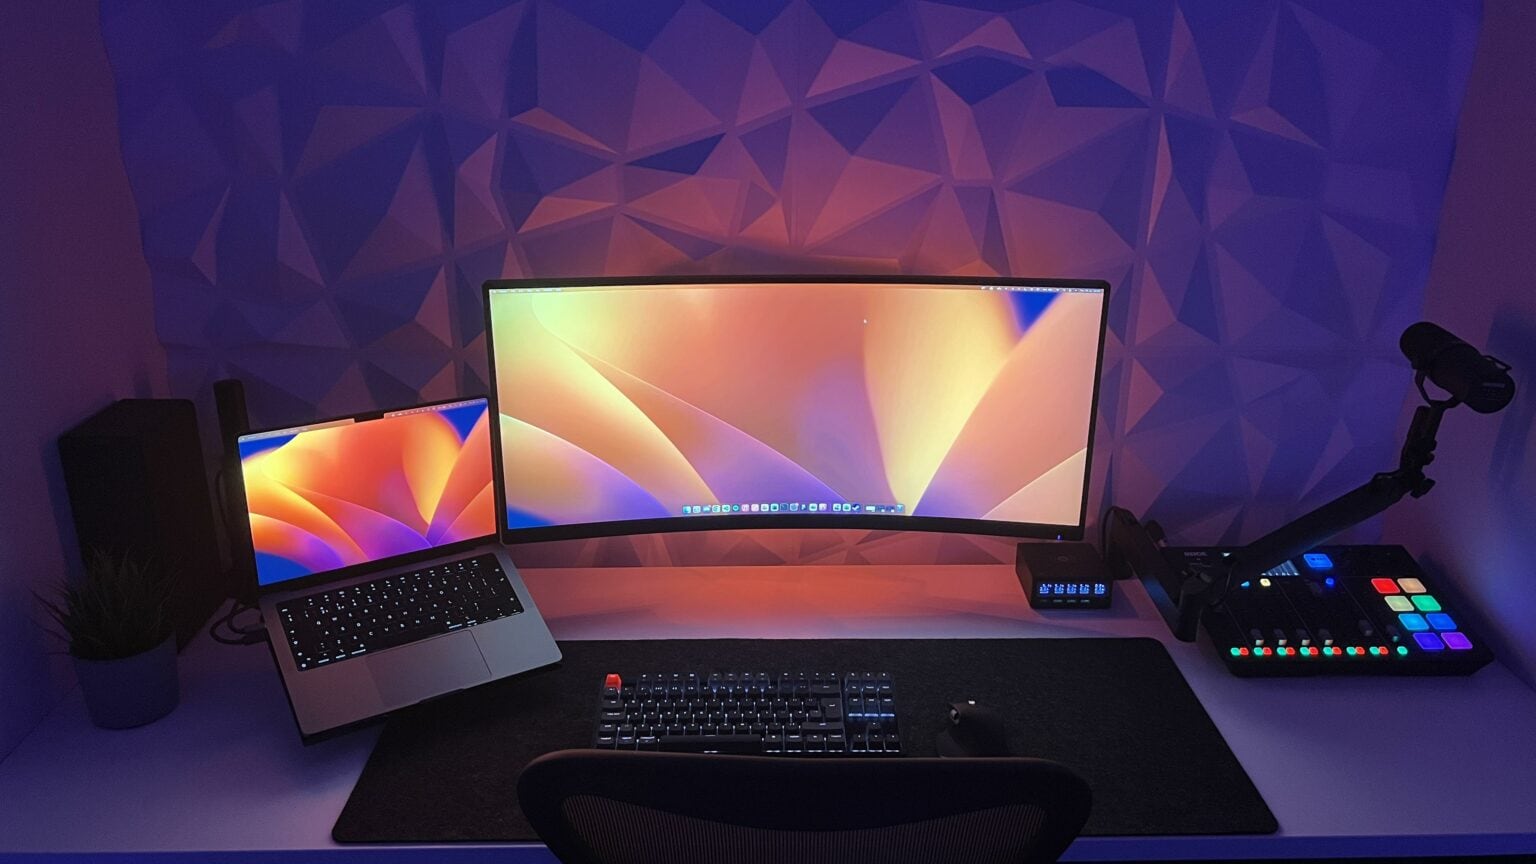 Transform your workspace with stunning 3D wall panels [Setups] | Cult of Mac